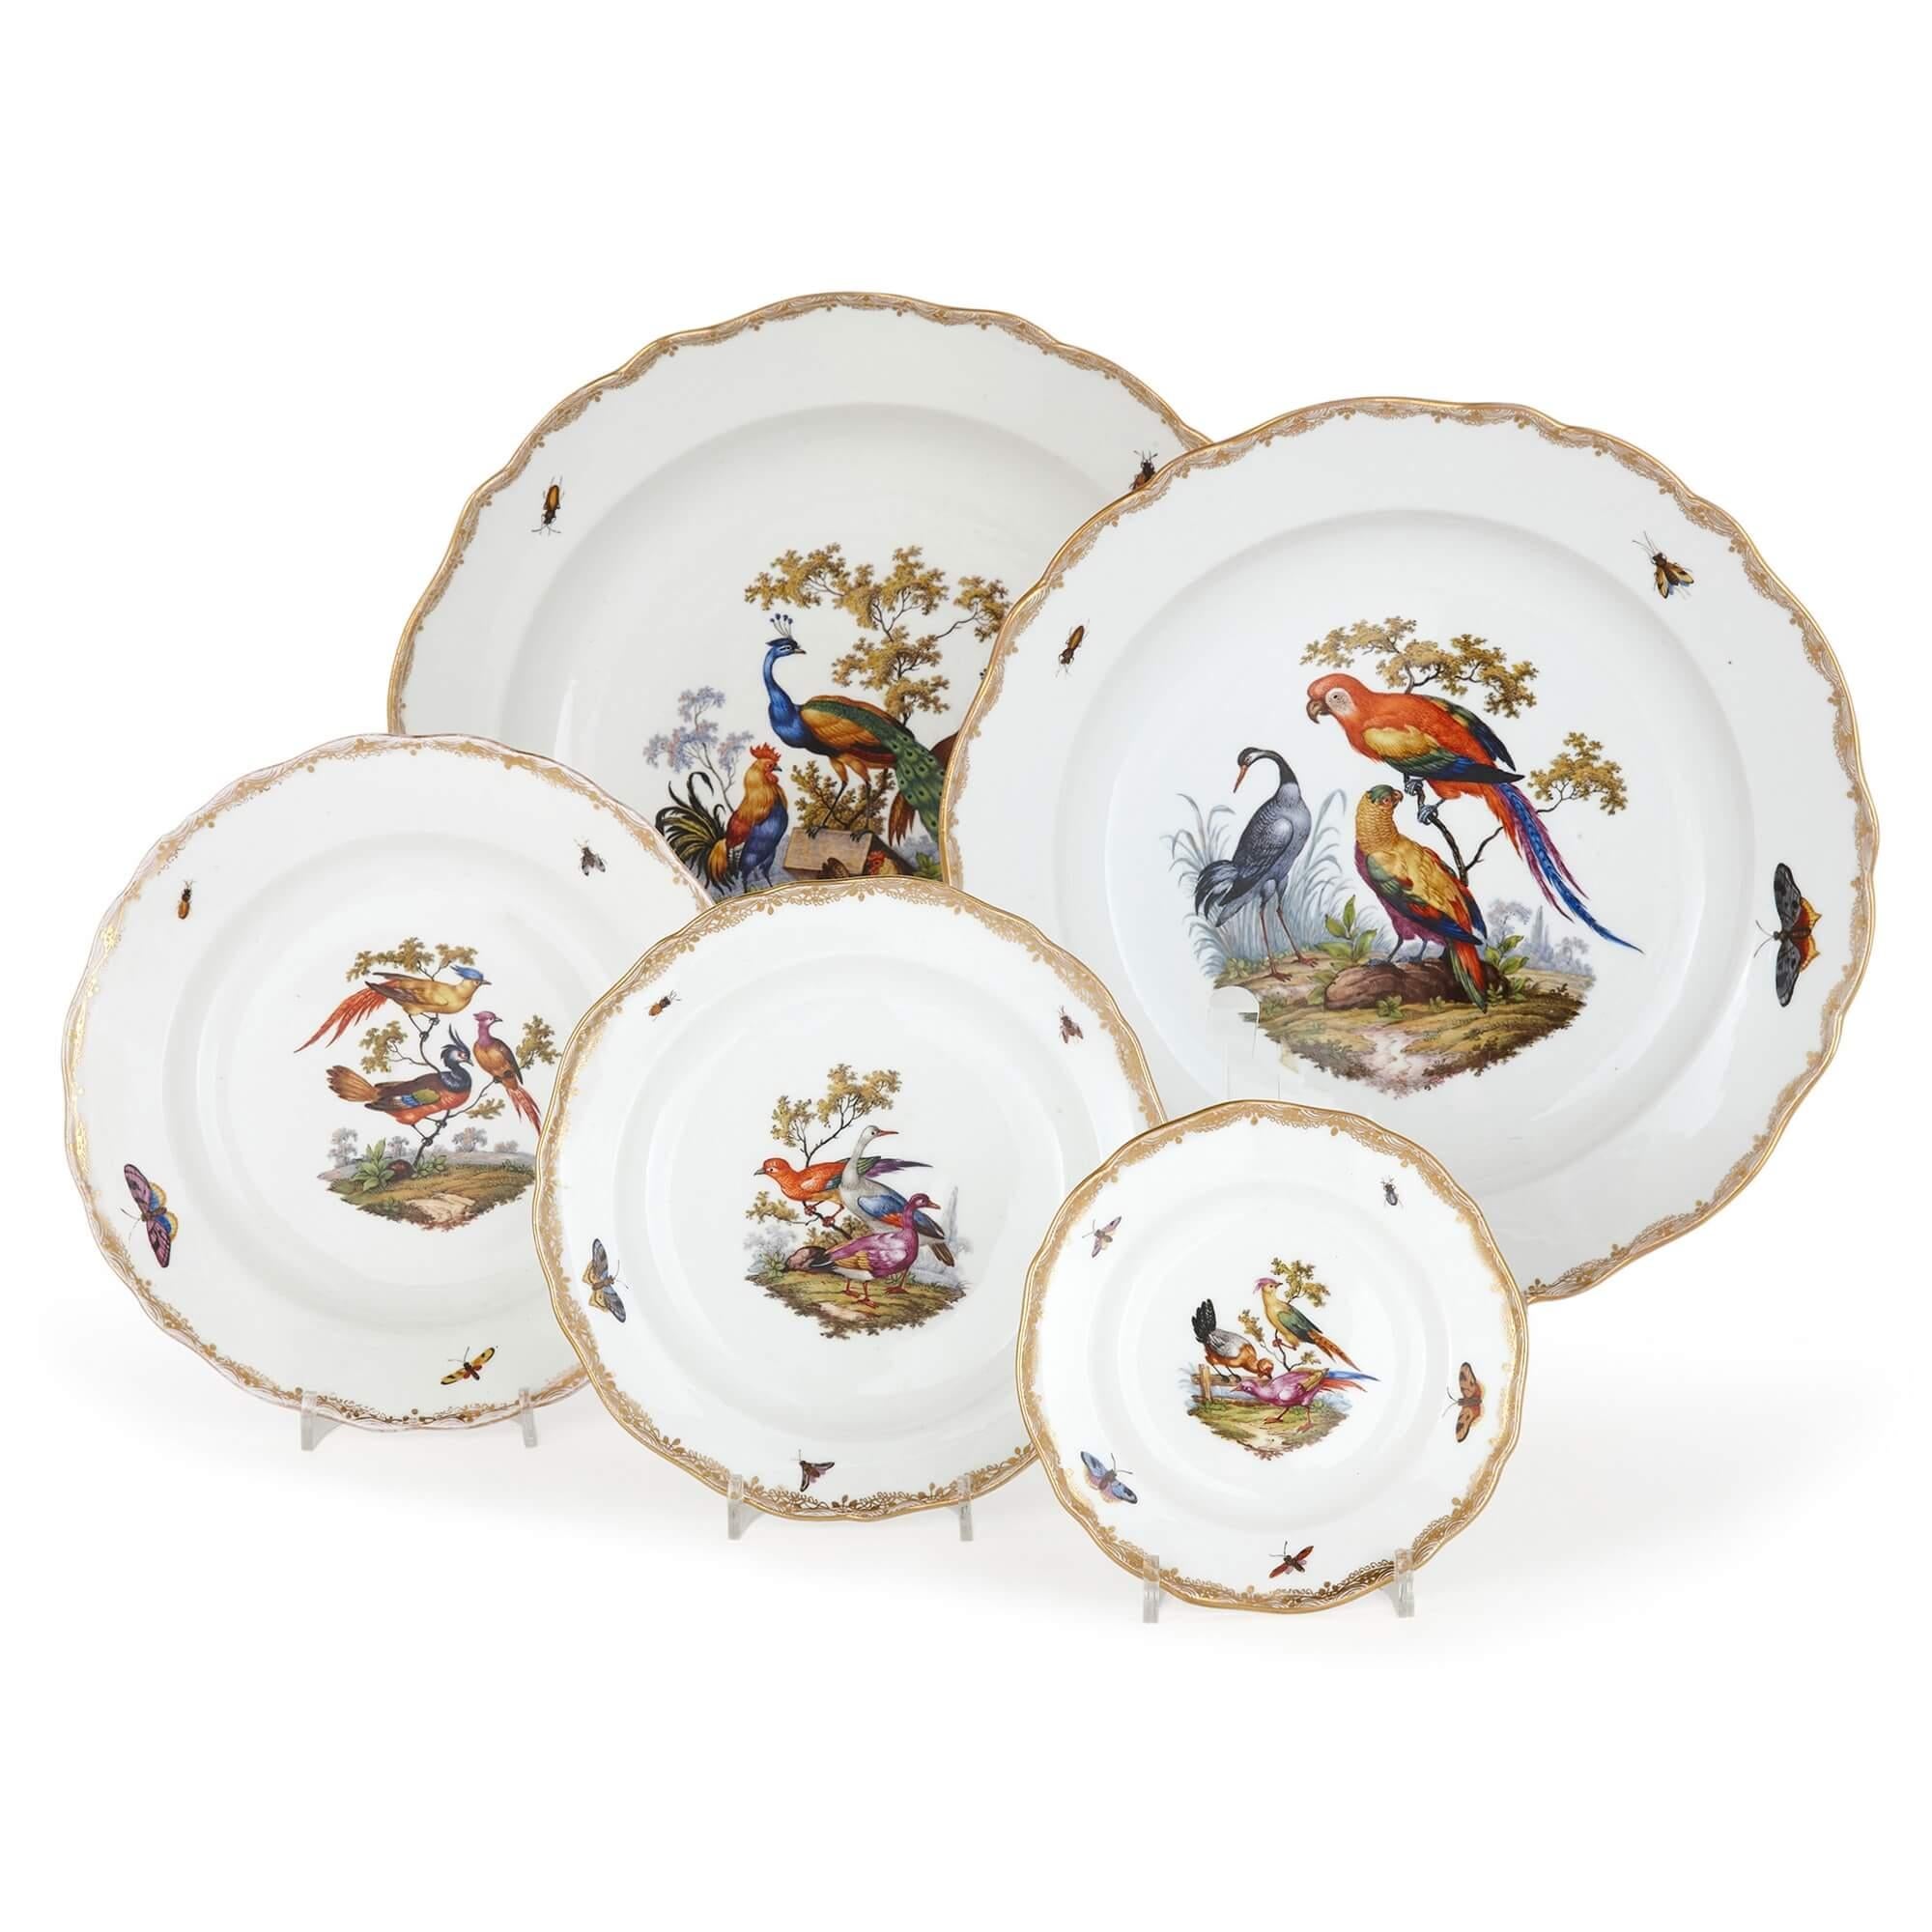 A very large Meissen porcelain dinner service
German, Late 19th Century
Largest dish: Height 6cm, width 57.5cm, depth 38cm
Smallest plate: Height 2.5cm, diameter 15cm

This stunning and expansive dinner service by the Meissen porcelain manufactory